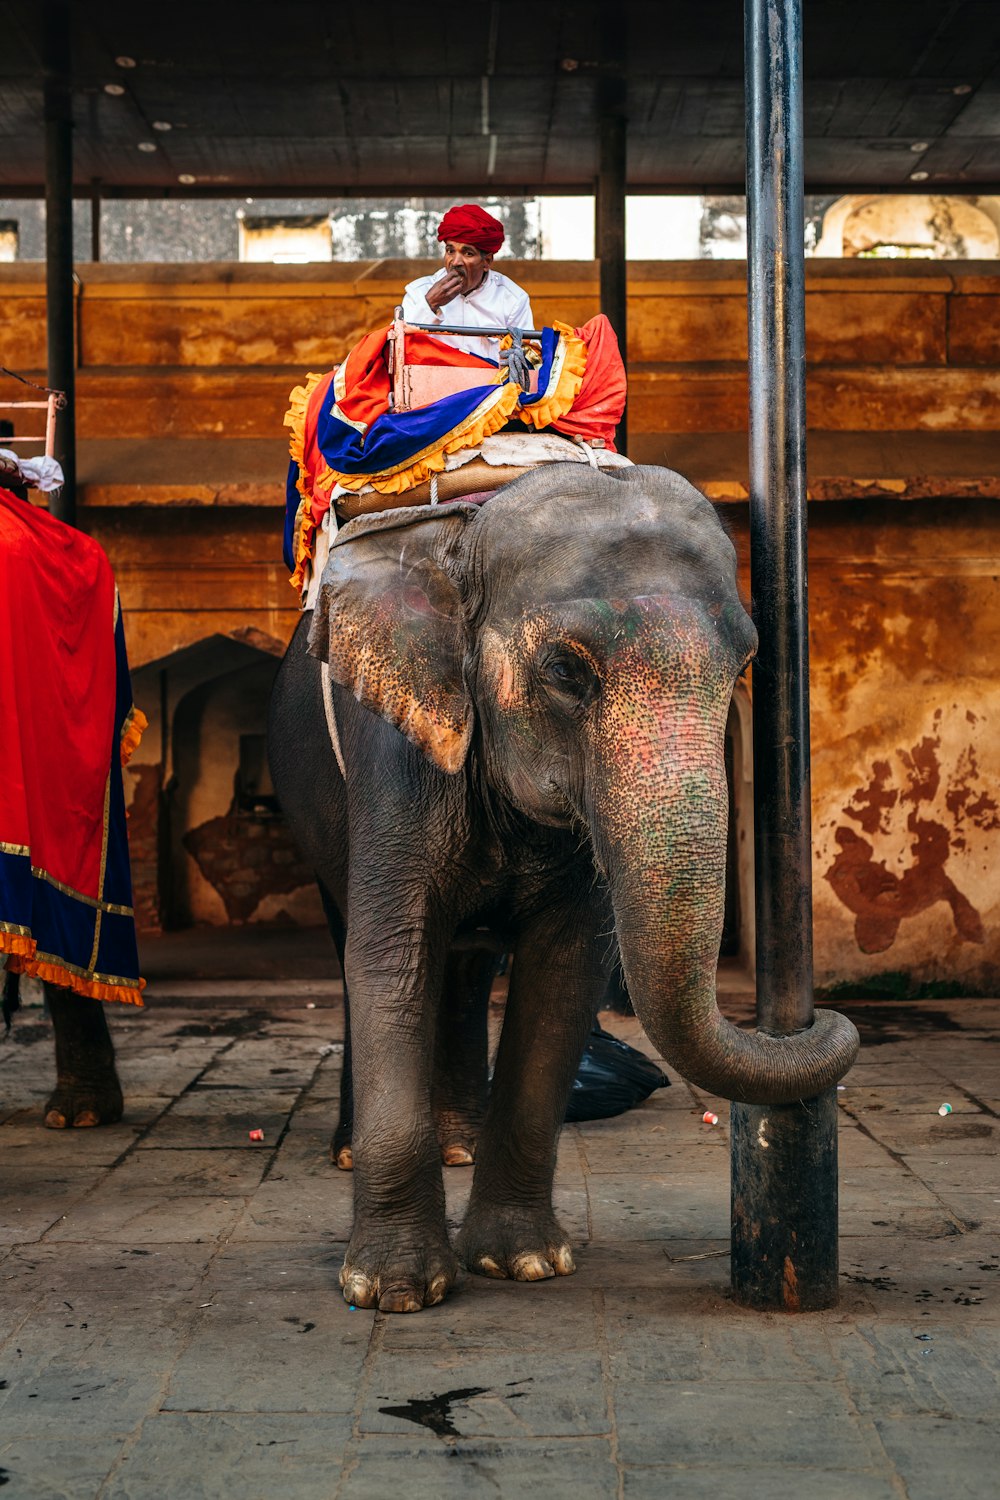 man in red and white shirt riding elephant